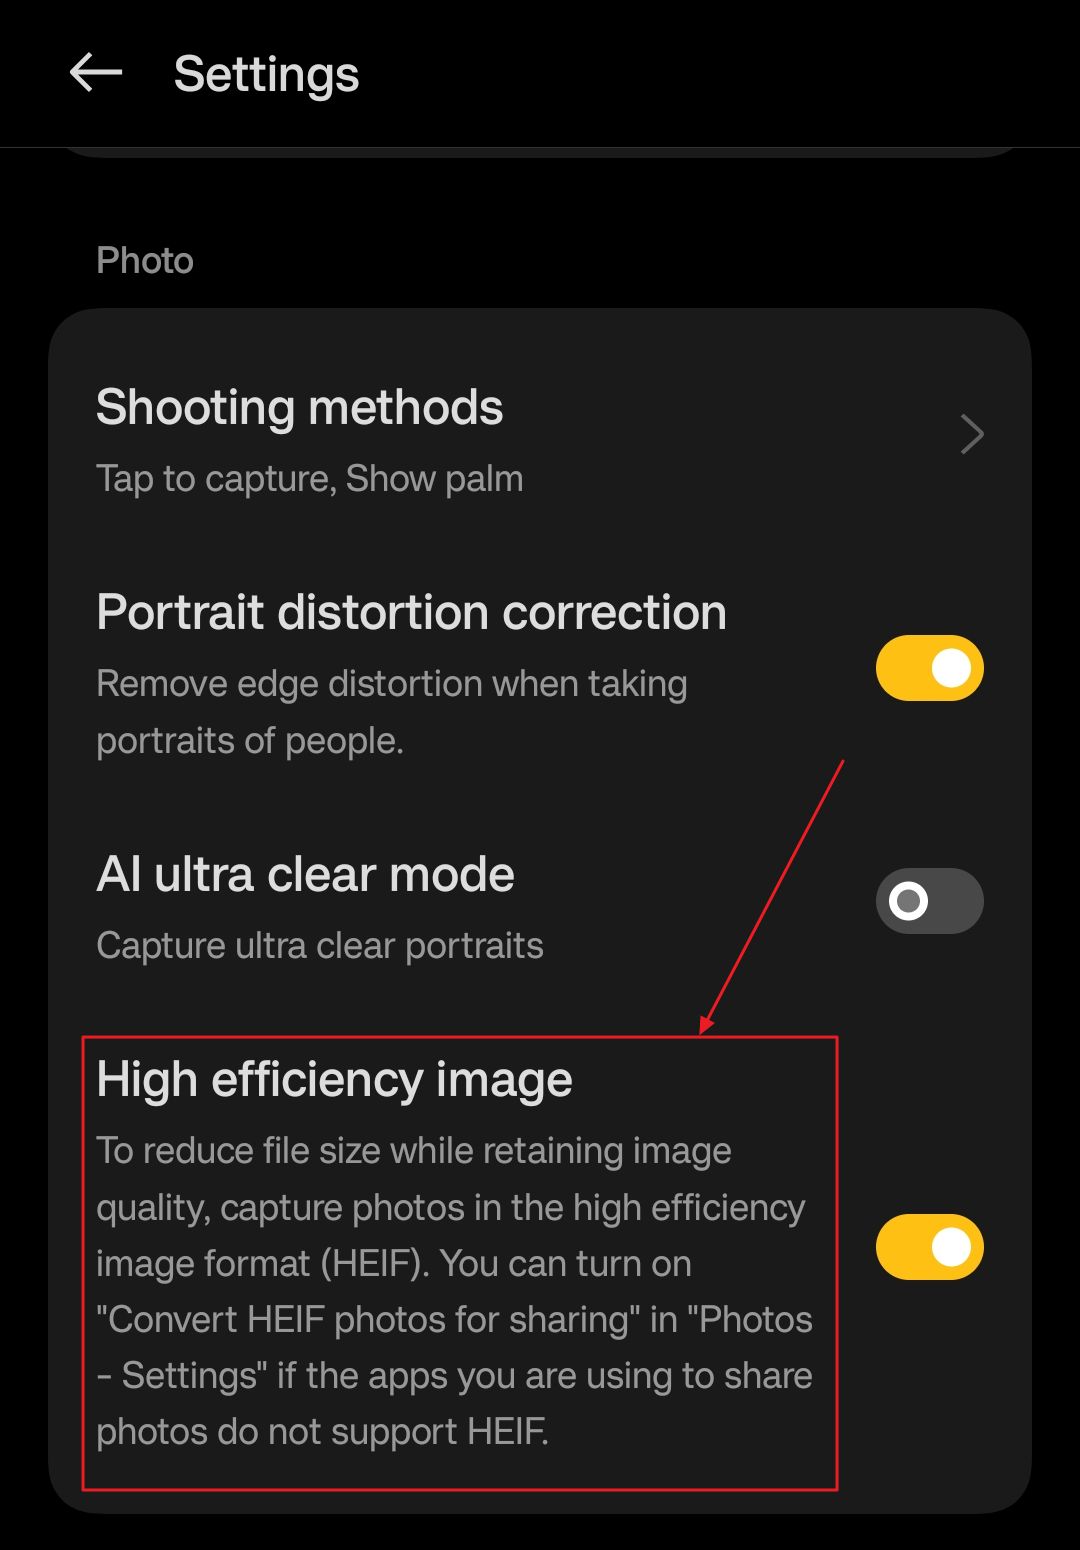 android camera app heif heic image format settings